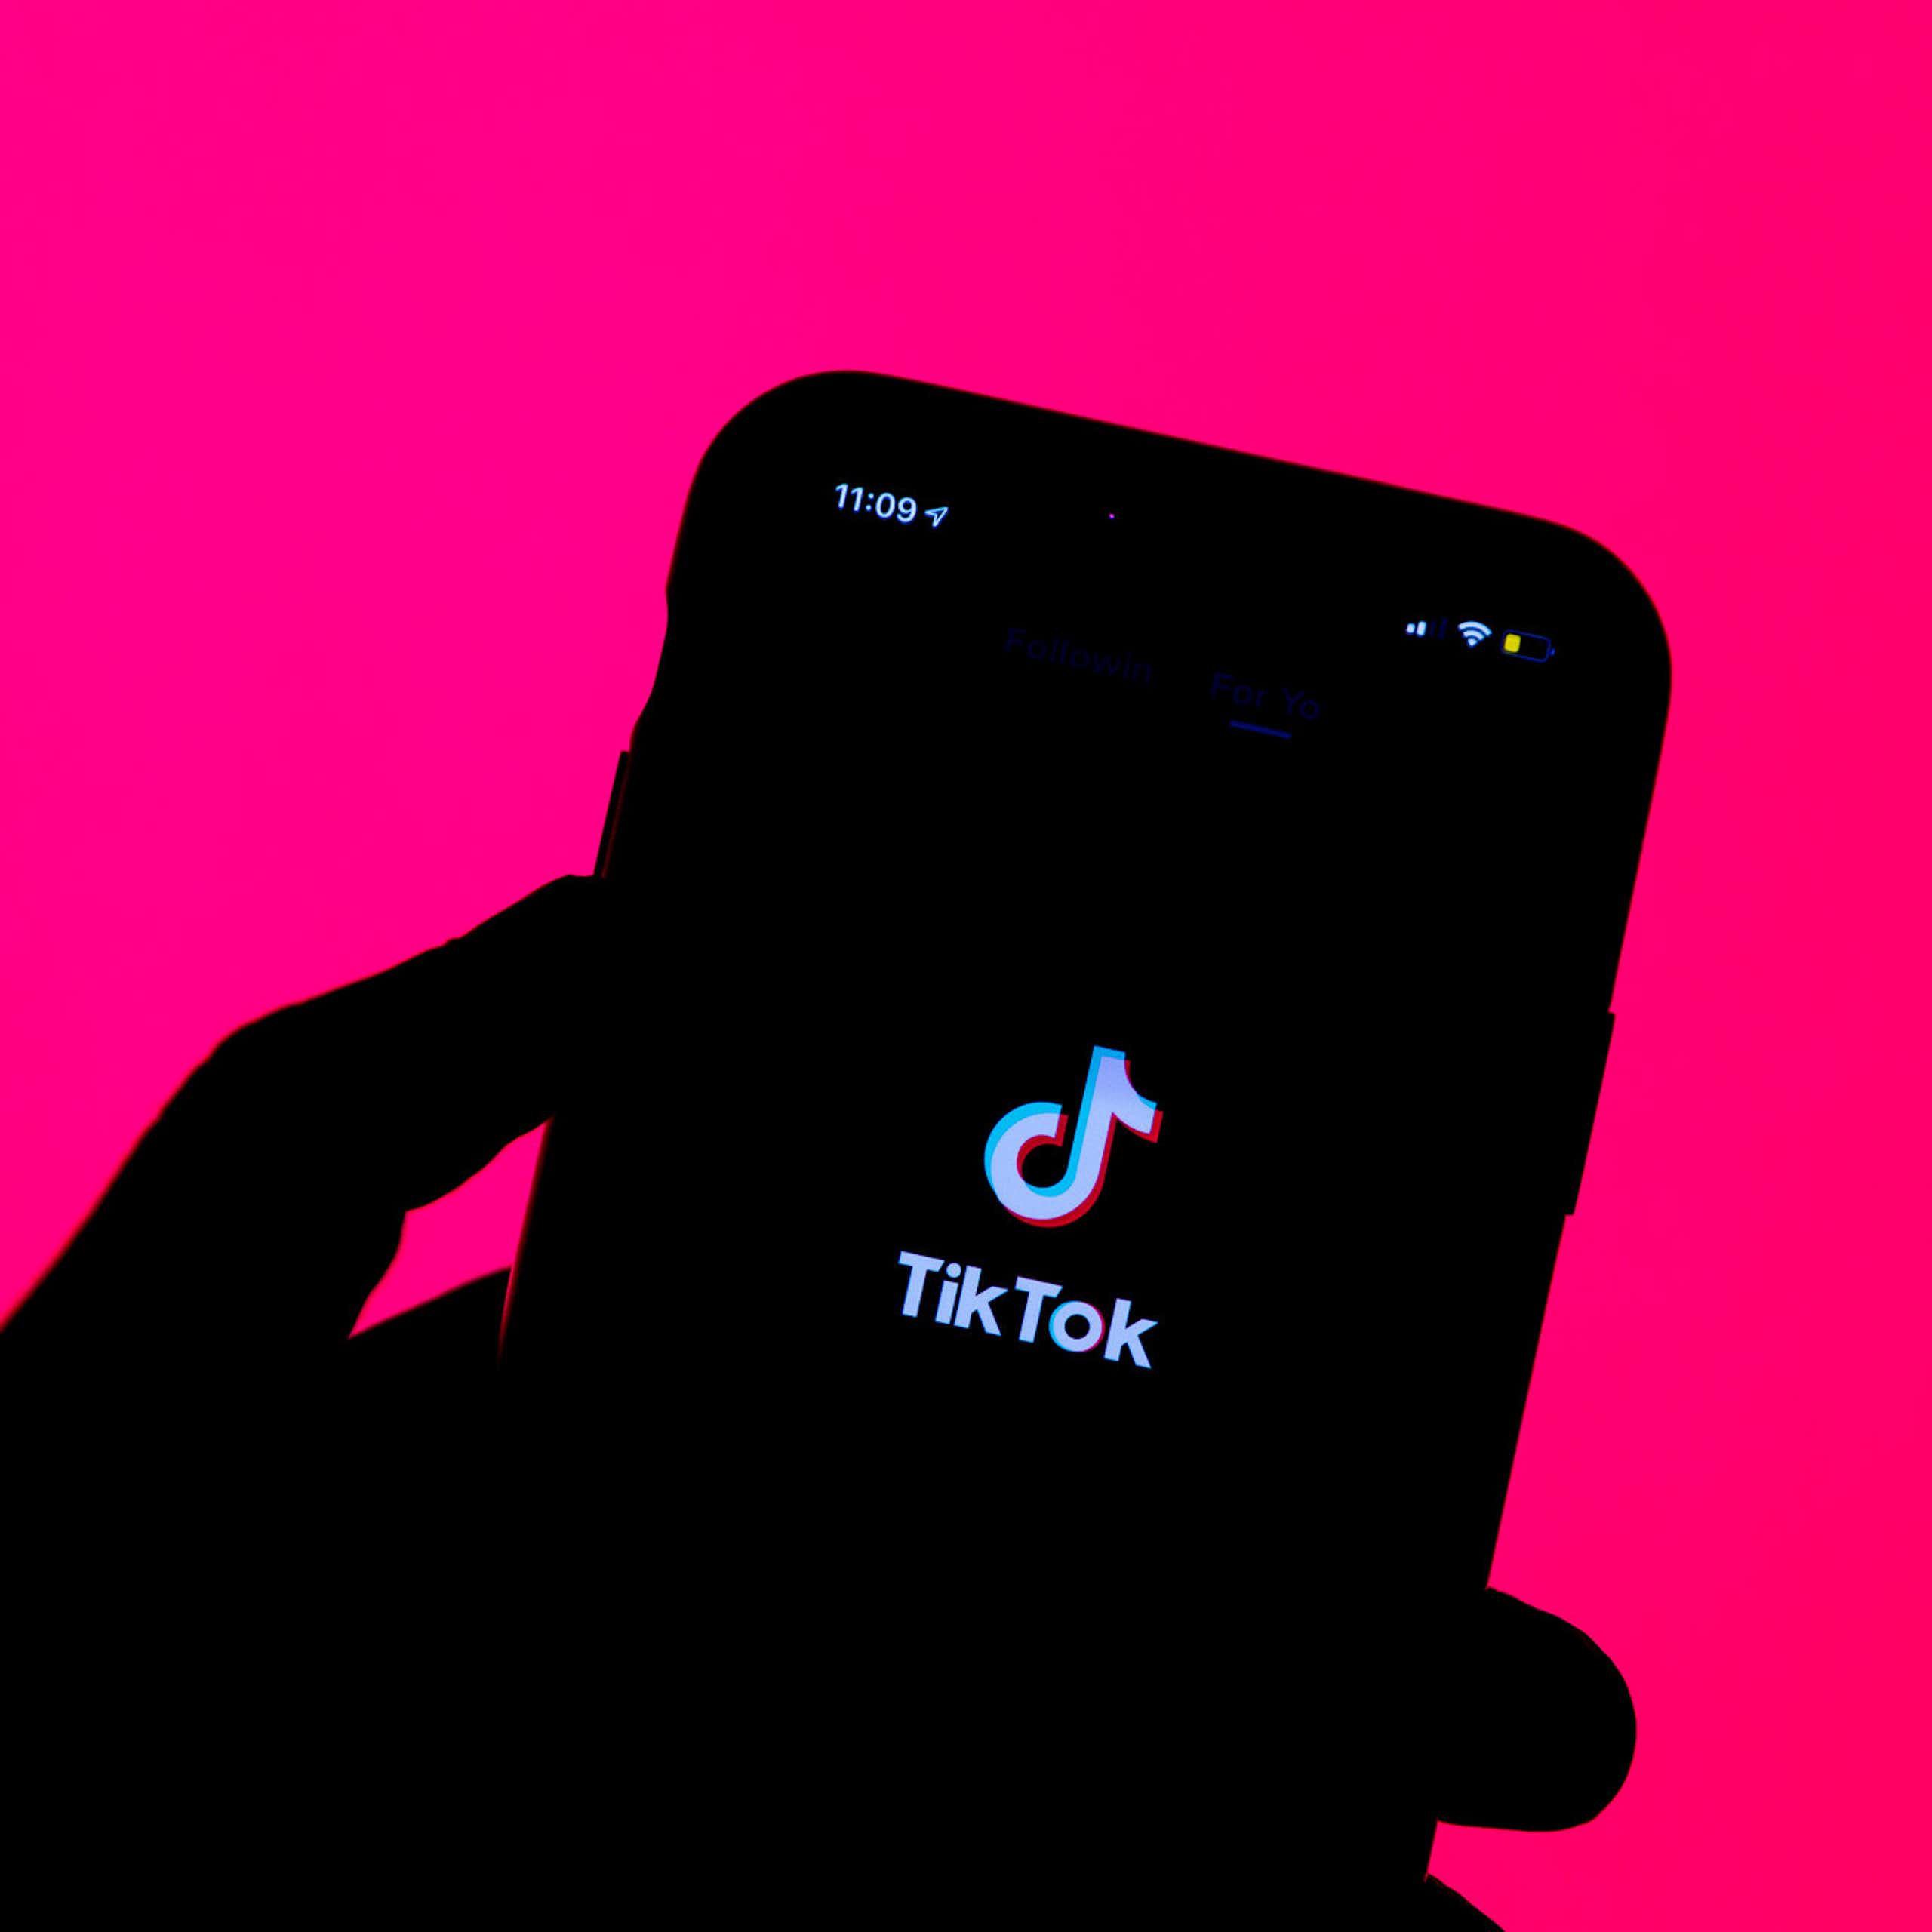 silhouette of a hand holding a smartphone with an app splash screen visible on the phone